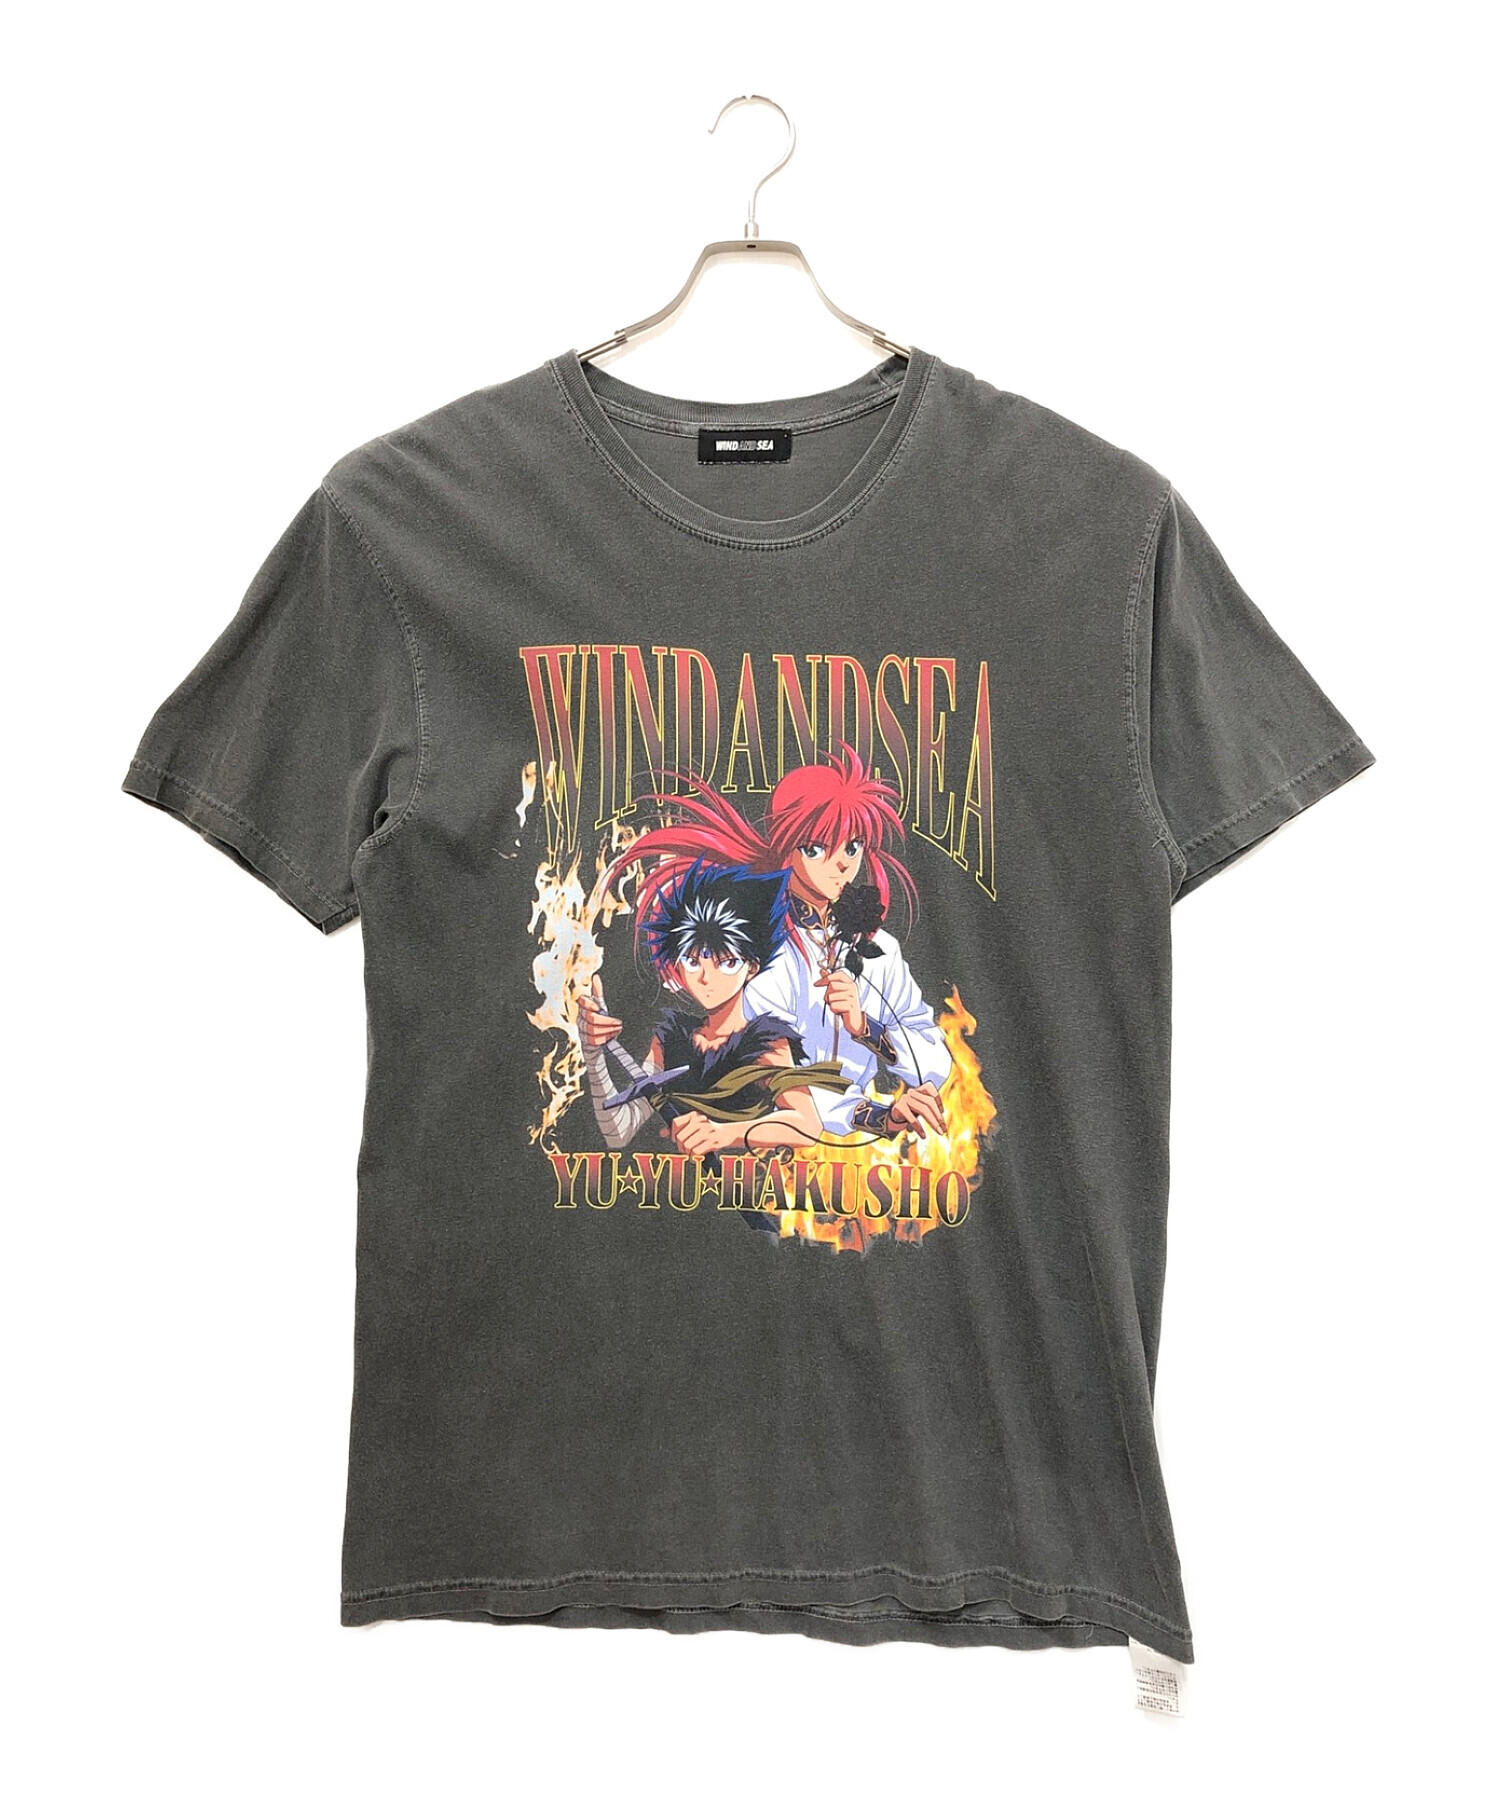 wind and sea 幽☆遊☆白書　プリントTシャツ